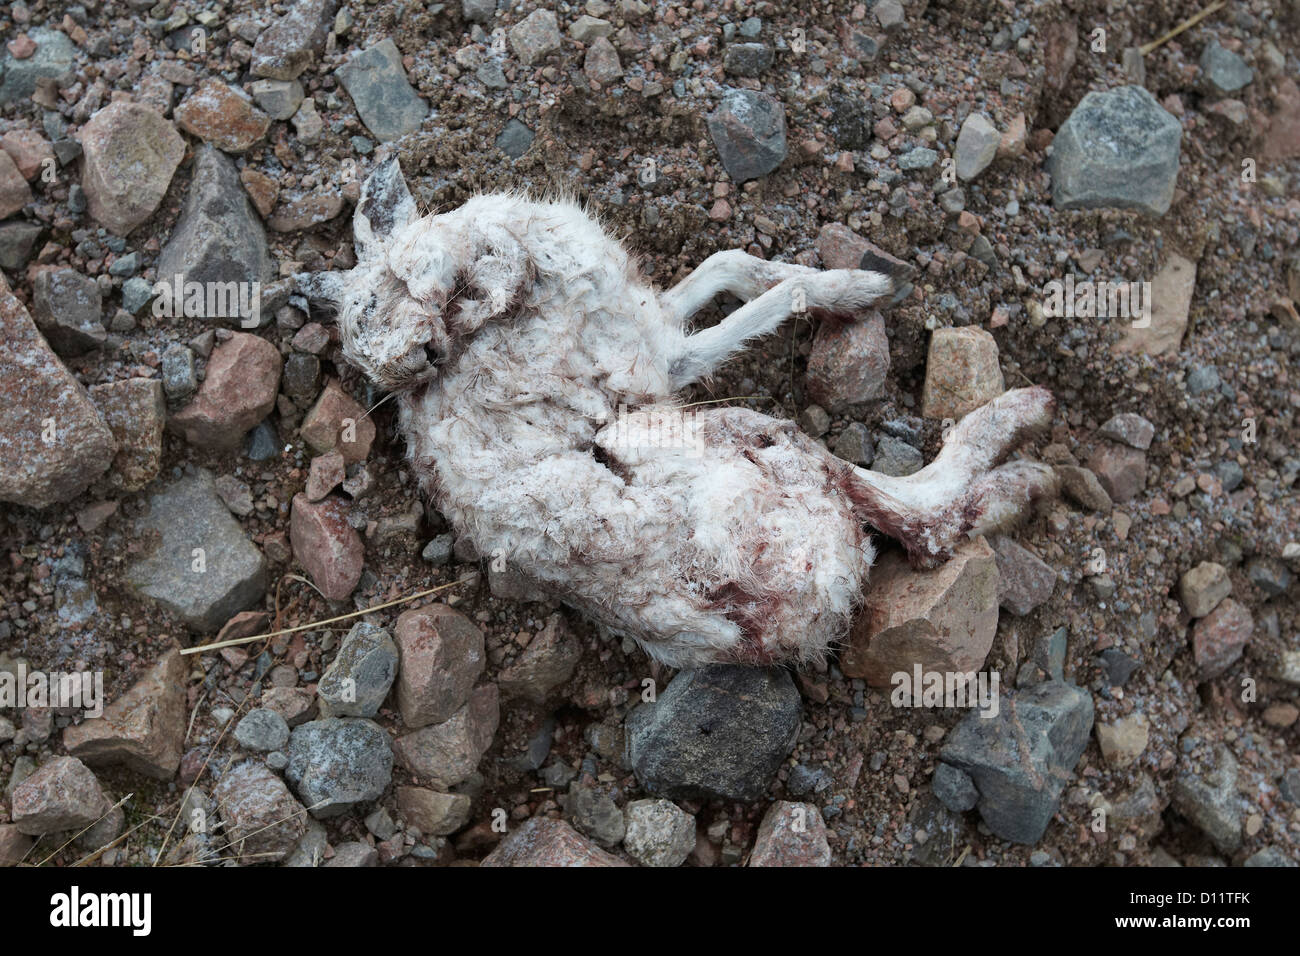 Dead mountain hare, Lepus timidus, shot for target practice by Red deer stalkers, Scottish Highlands, UK Stock Photo